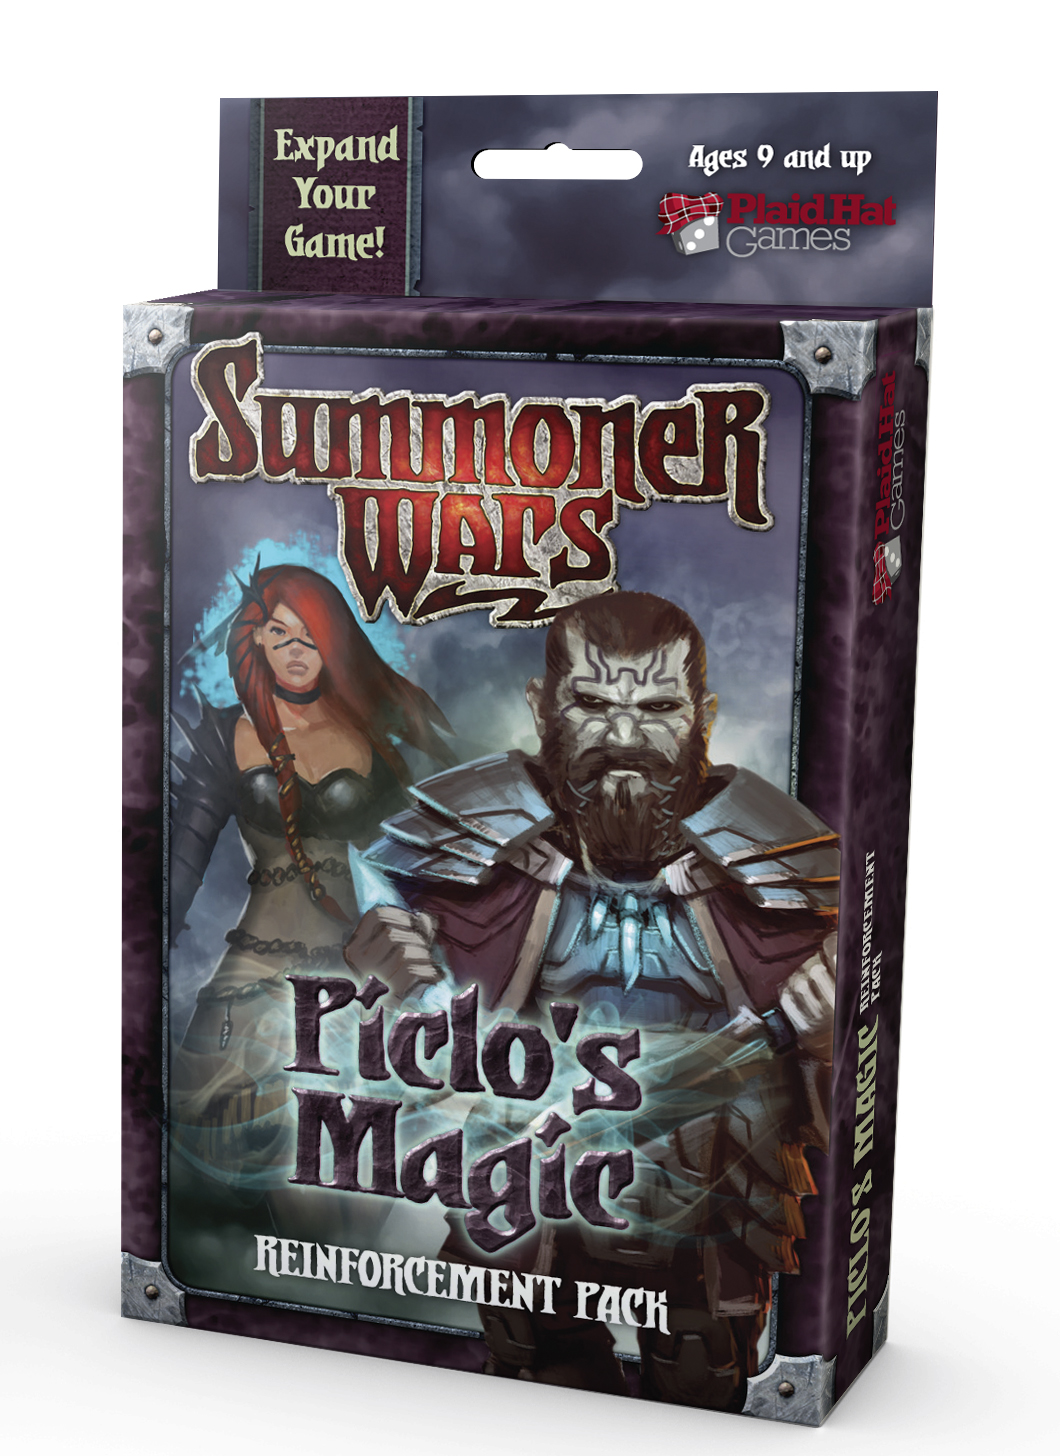 Summoner Wars: Piclo's Magic by Plaid Hat Games